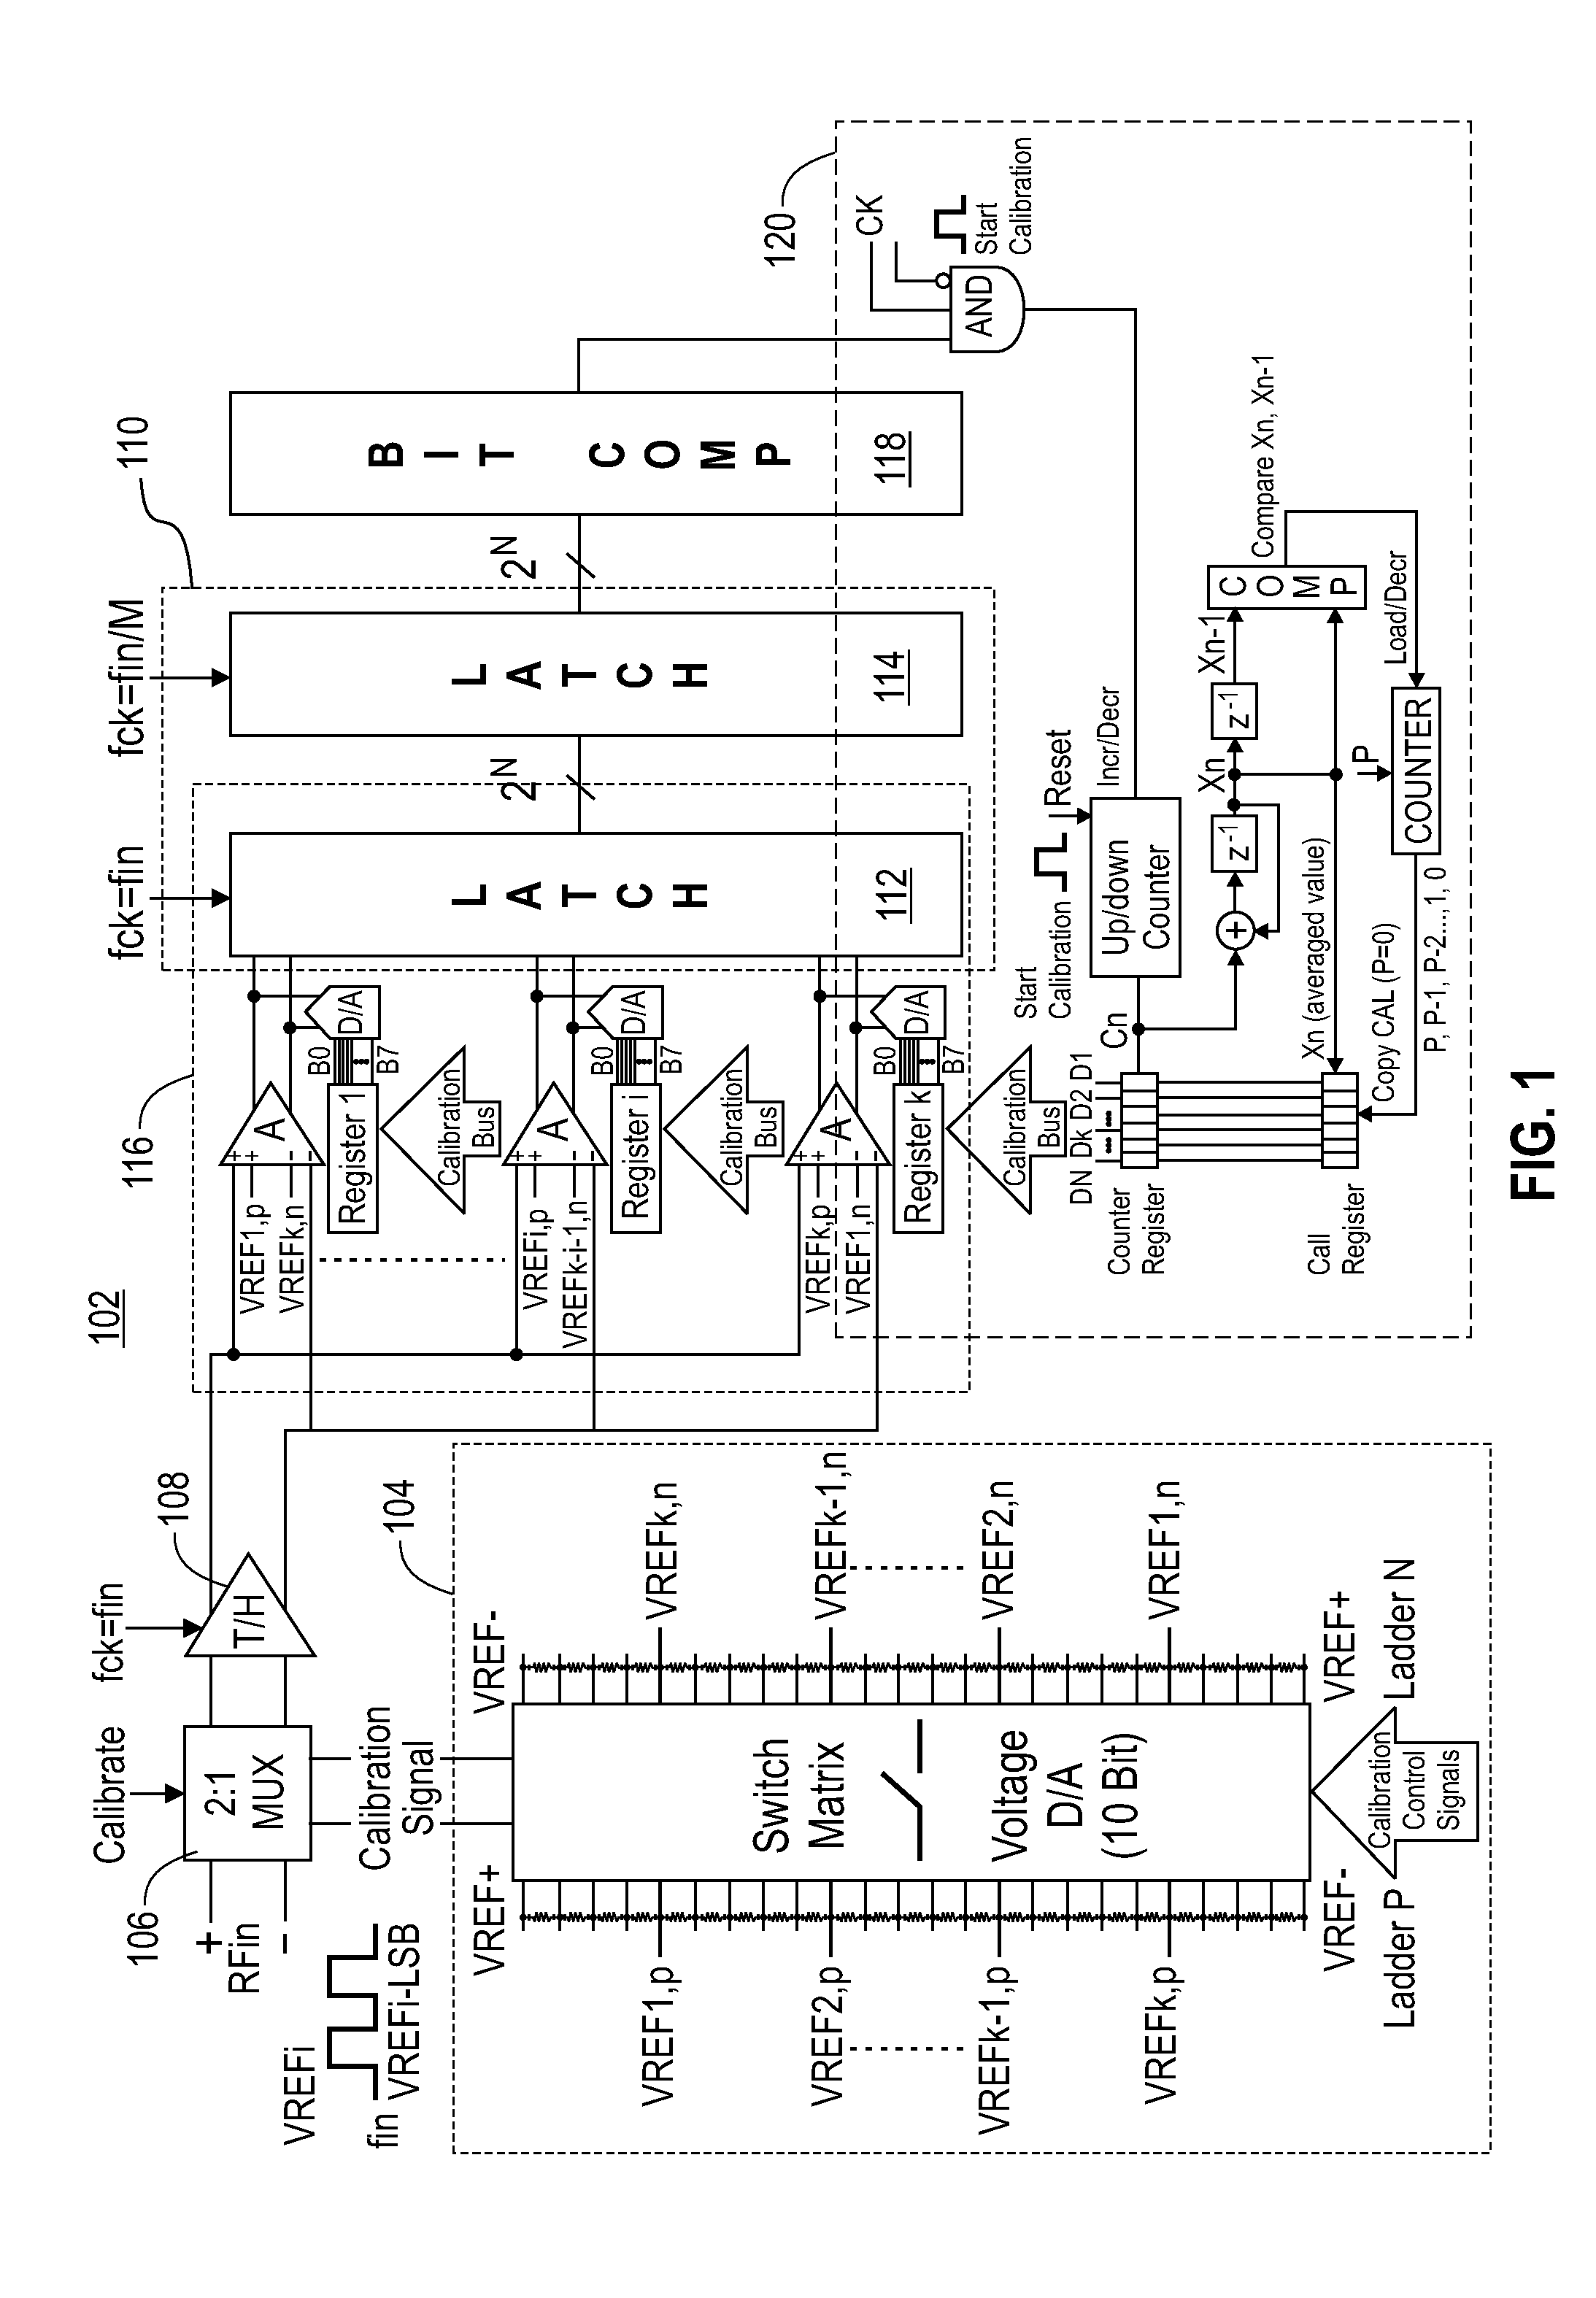 Flash analog to digital converter with method and system for dynamic calibration